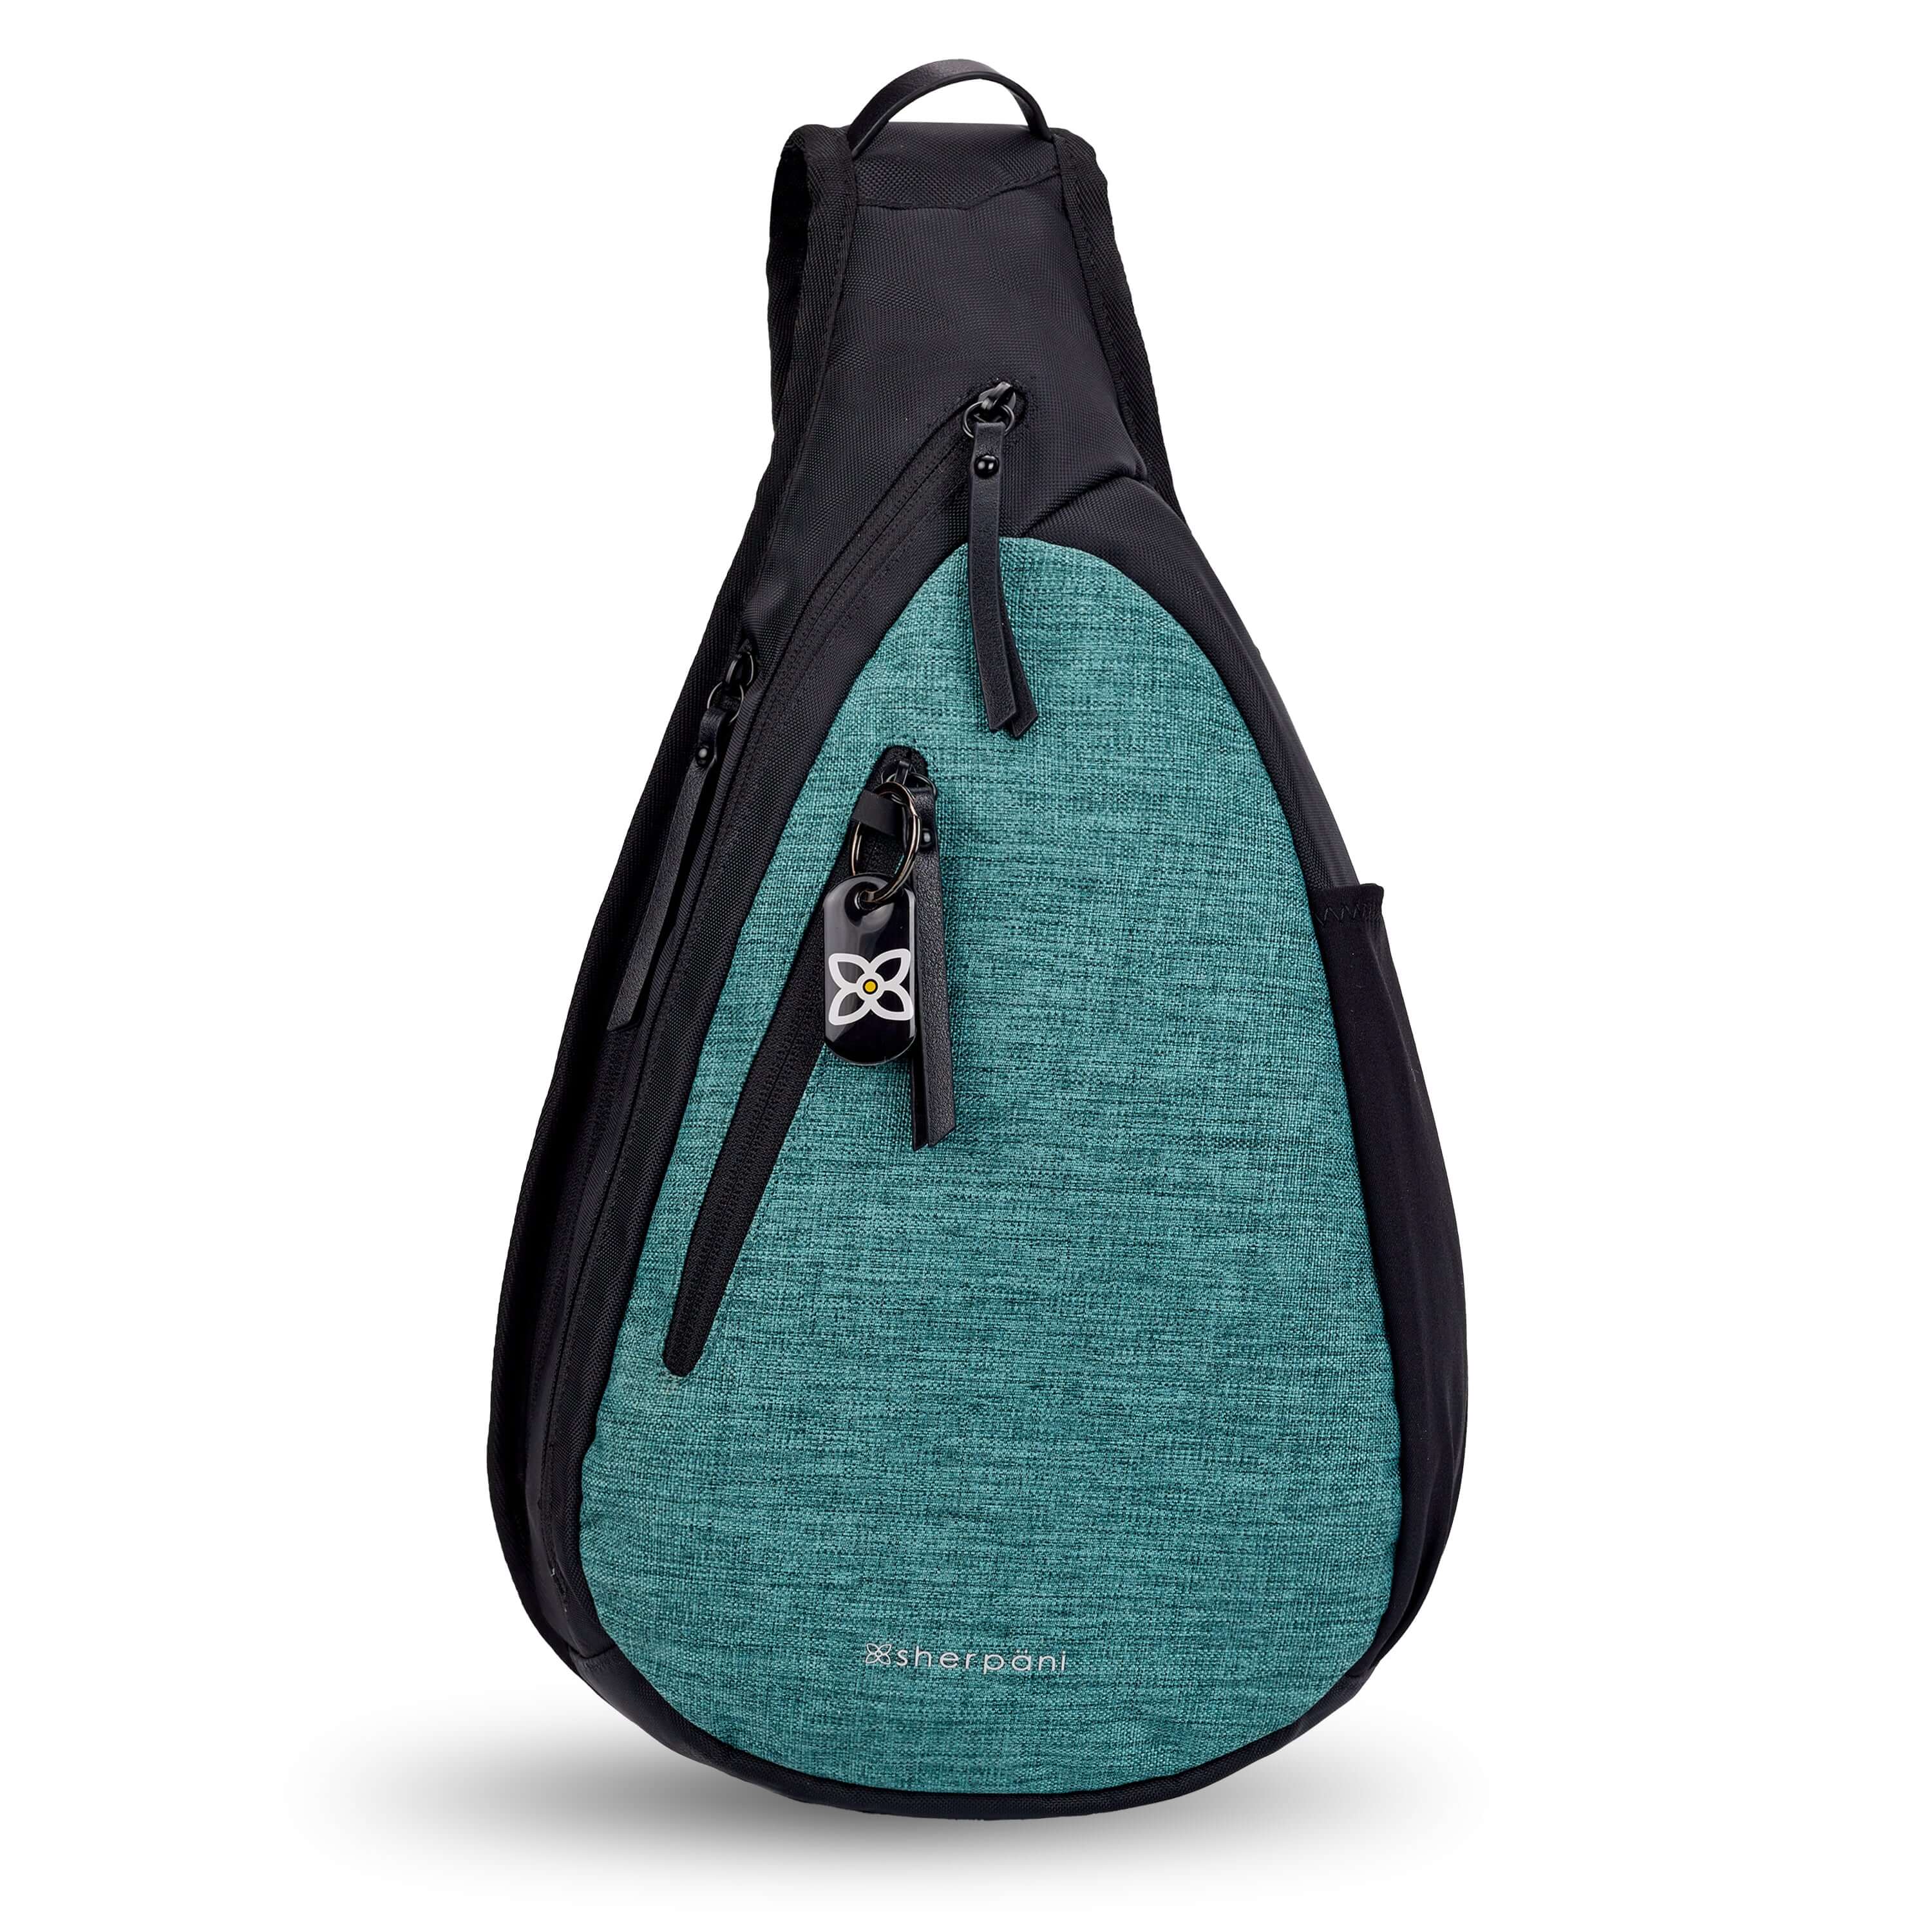 Flat front view of Sherpani's Anti-Theft bag, the Esprit AT in Teal, with vegan leather accents in black. There is a locking zipper compartment on the front, and two more zipper compartments on the side. An elastic water bottle holder sits on the other side of the bag. 